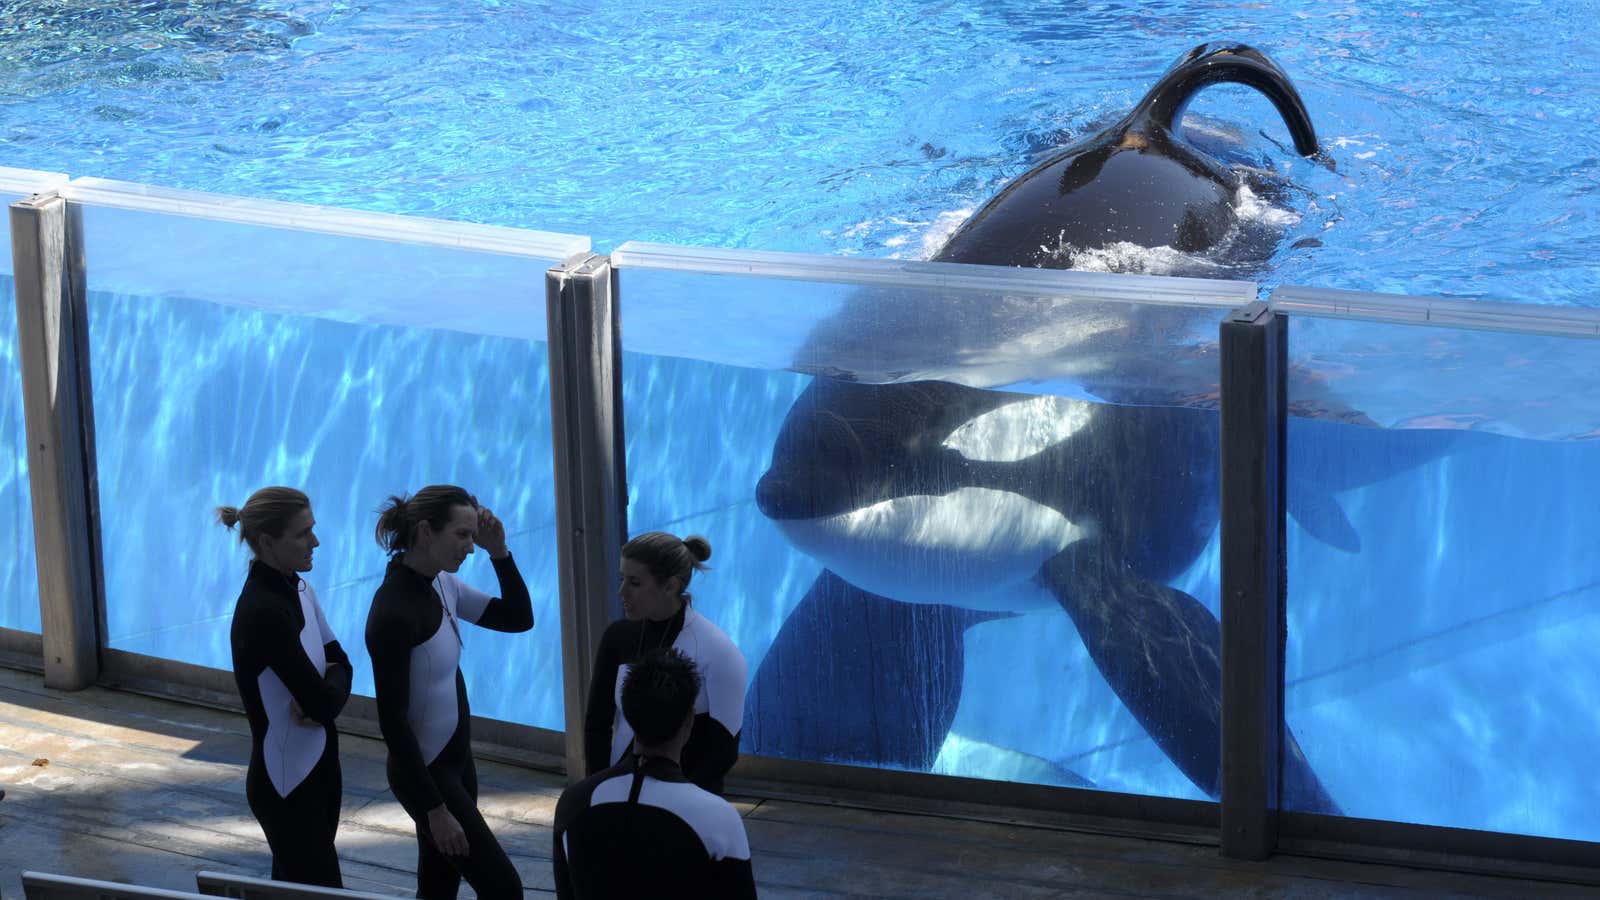 SeaWorld is ending its live orca shows, but it may be too late to save the company.